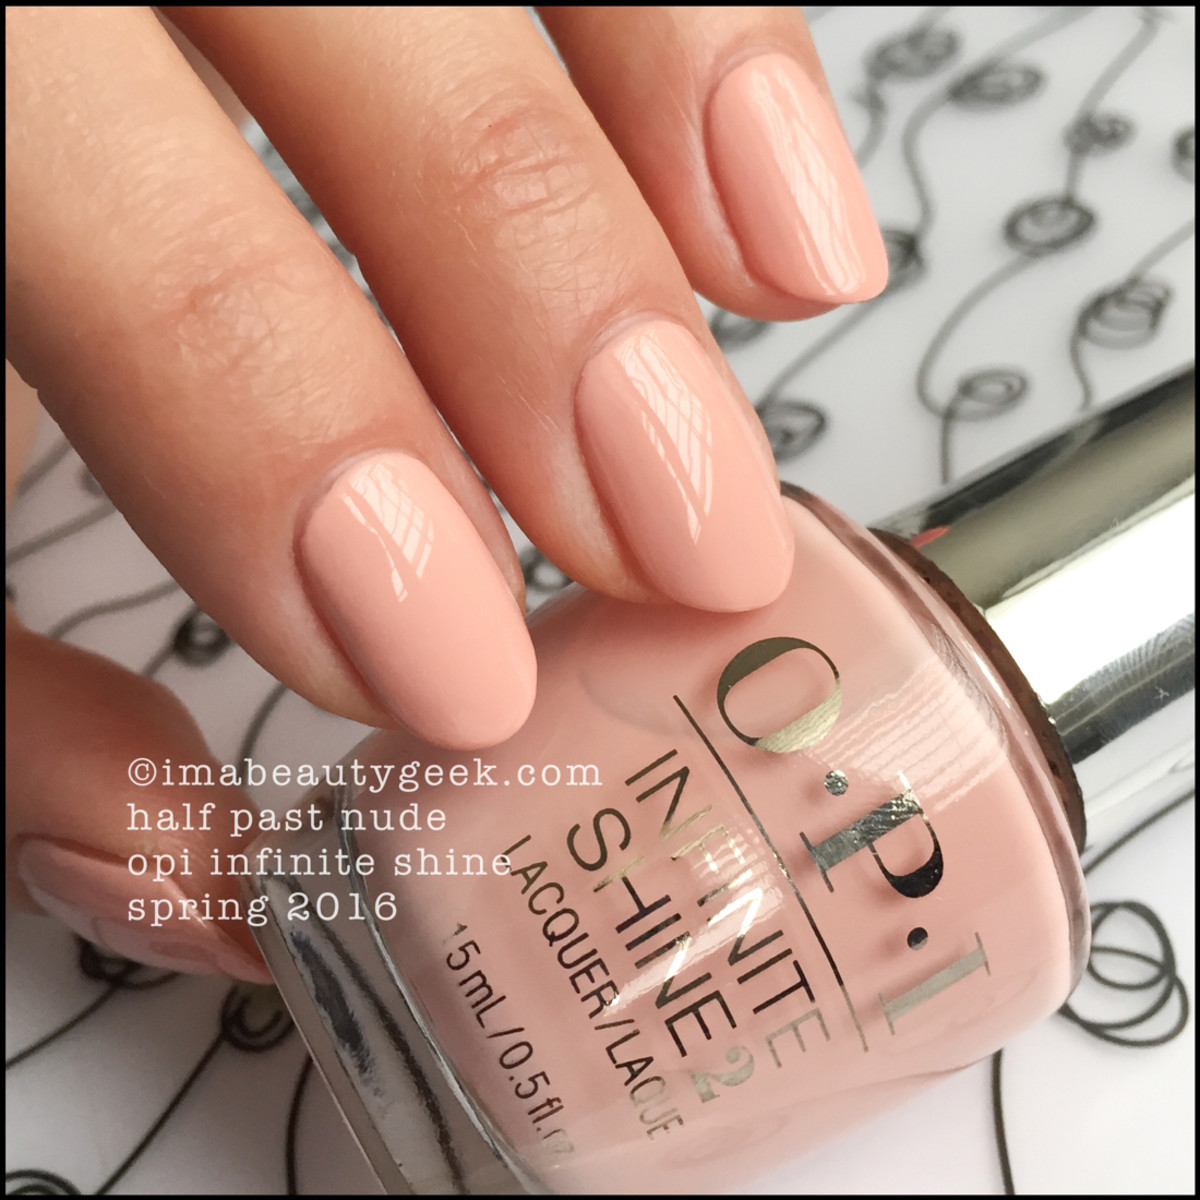 OPI Infinite Shine Swatches Spring 2016_OPI Half Past Nude